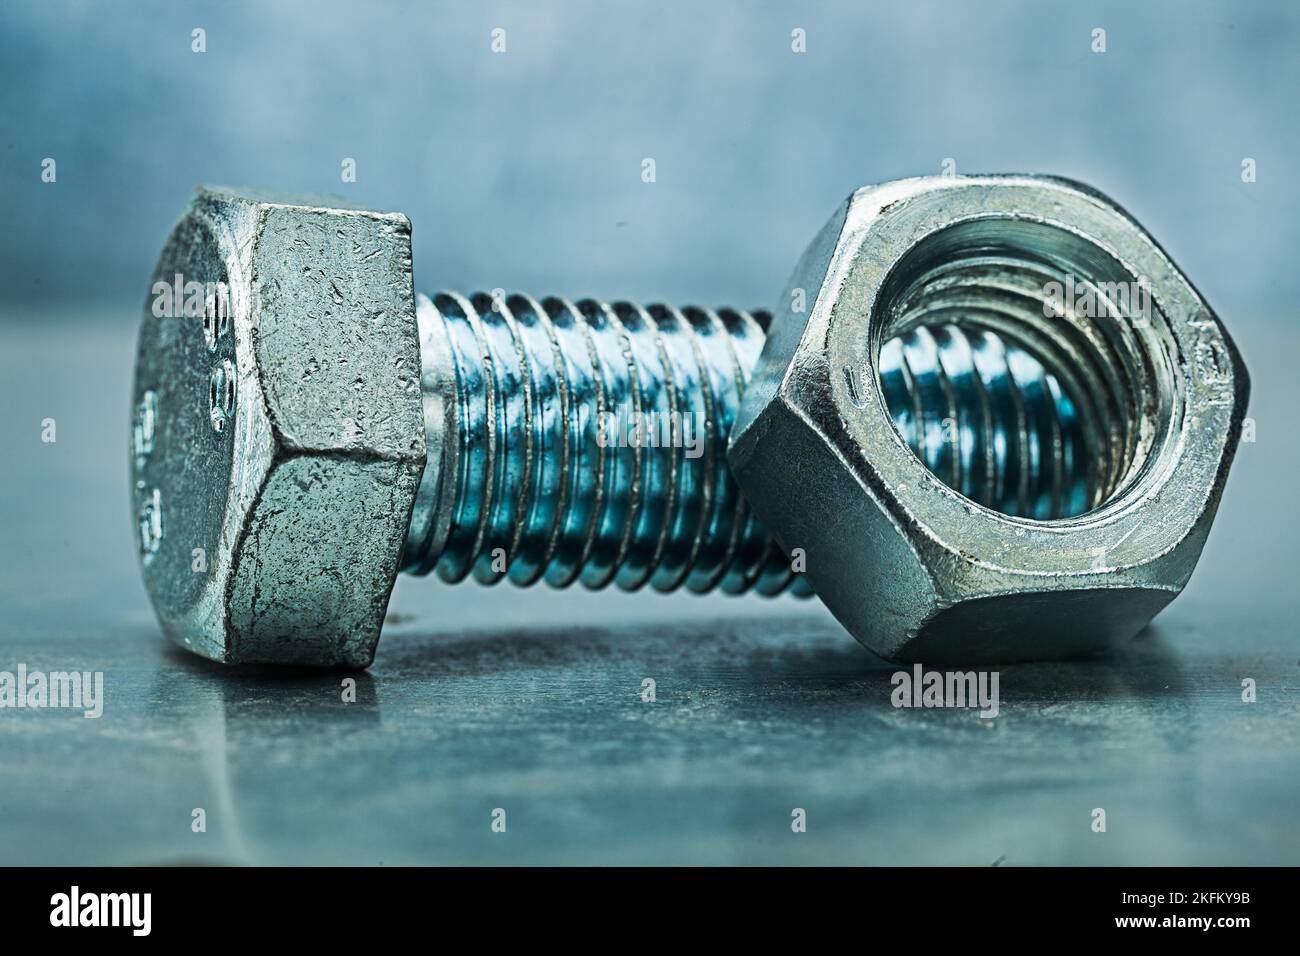 bolt and nut on metalic background Stock Photo